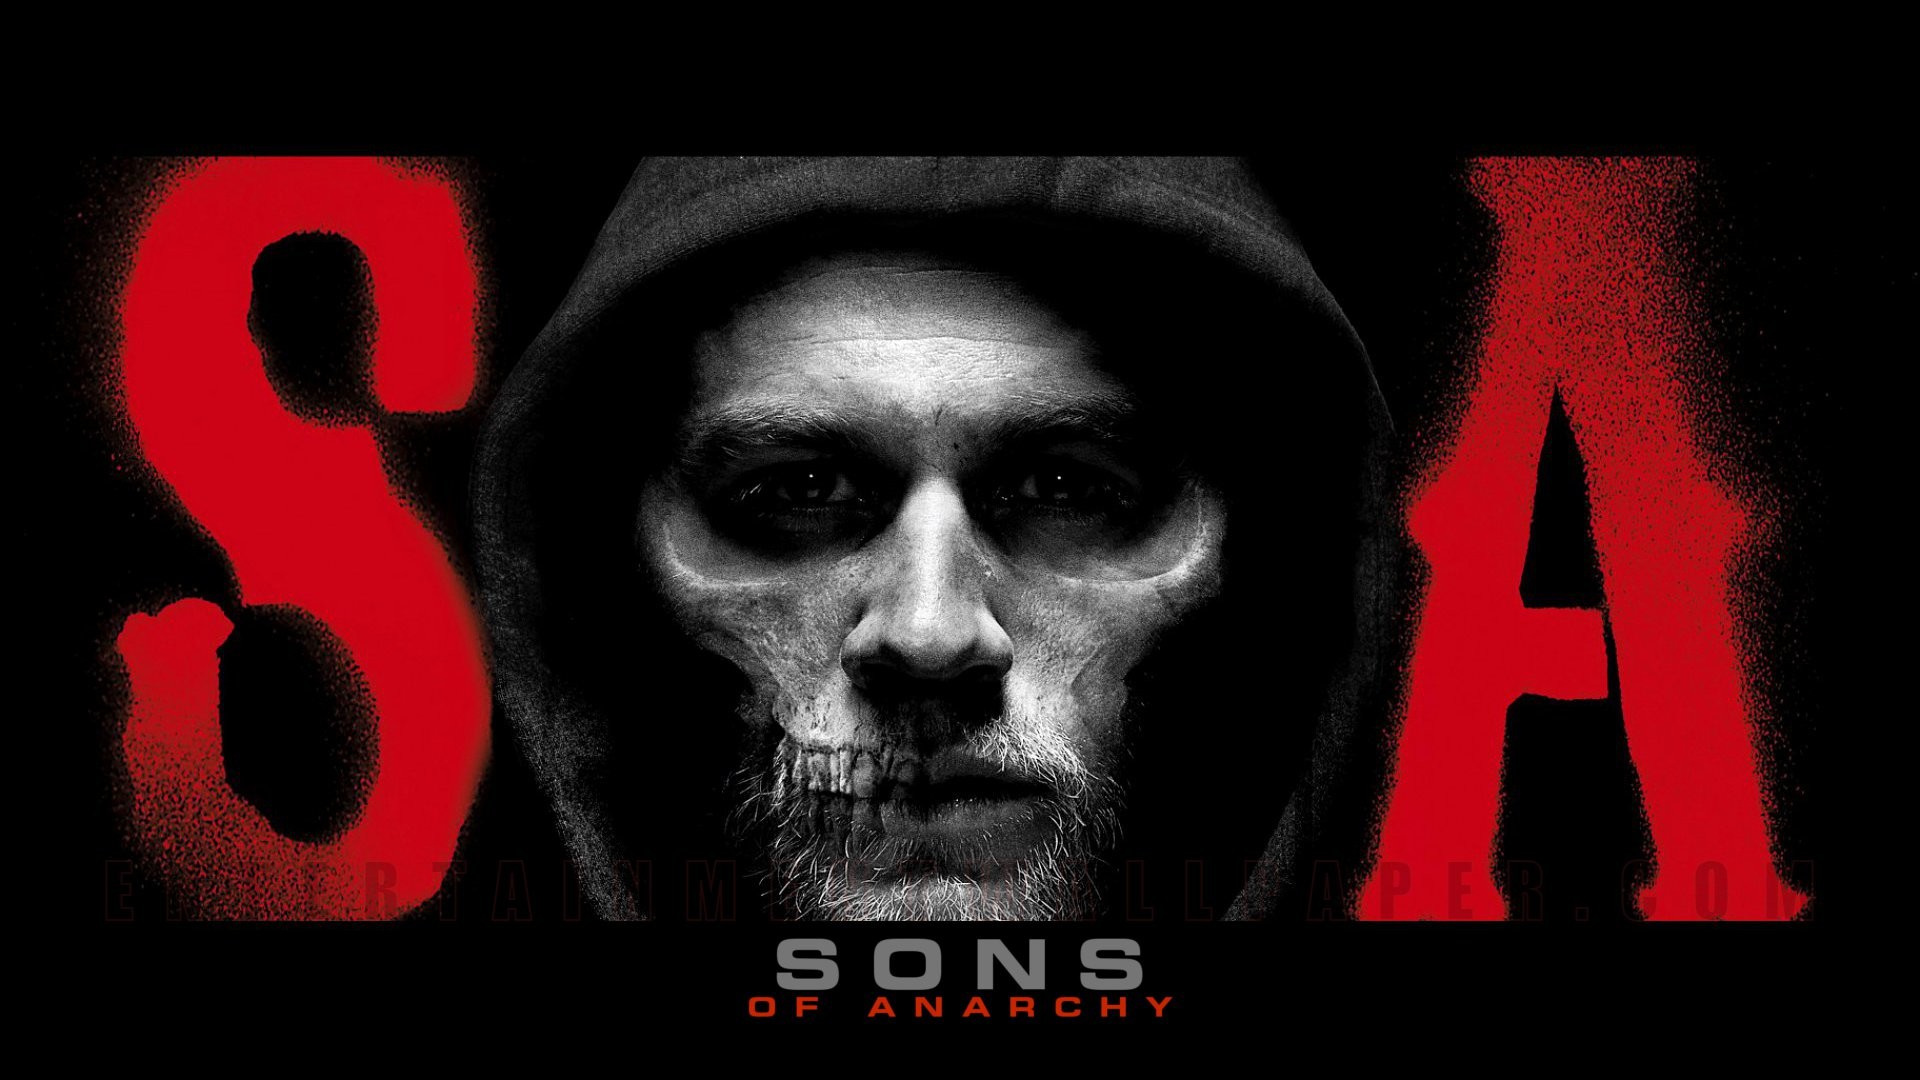 1920x1080 Sons of Anarchy Wallpaper | sons of anarchy wallpaper 20044857 size   more sons of anarchy